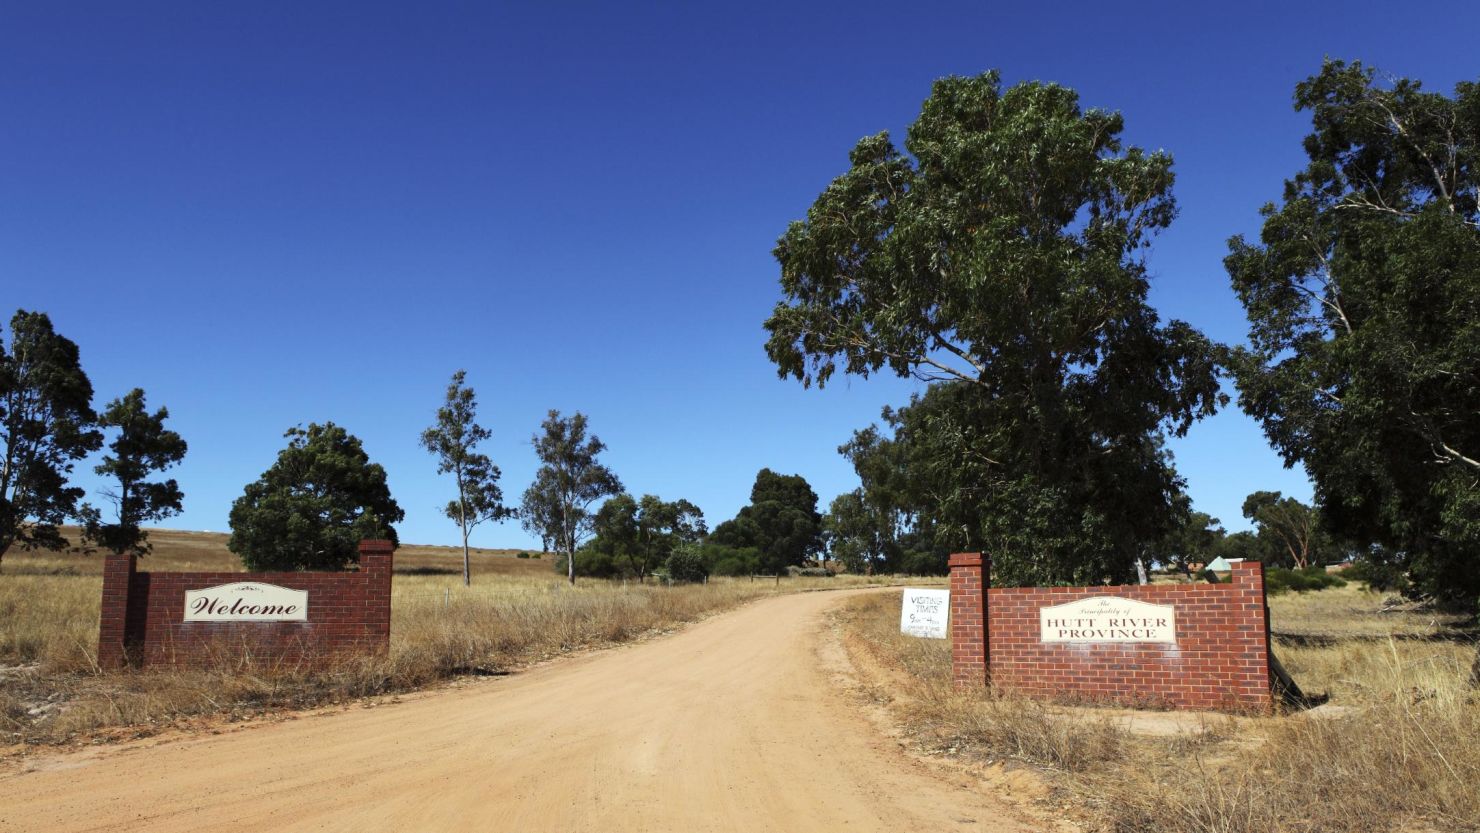 Mandatory Credit: Photo by Stuart Forster/Shutterstock (1735646n)
Entrance to the Principality of Hutt River, Western Australia, Australia. Leonard George Casley seceded from Australia on 21 April 1970 and claims to be the head of a sovereign state. He pays no taxes to the Commonwealth of Australia.
Australia - 2011